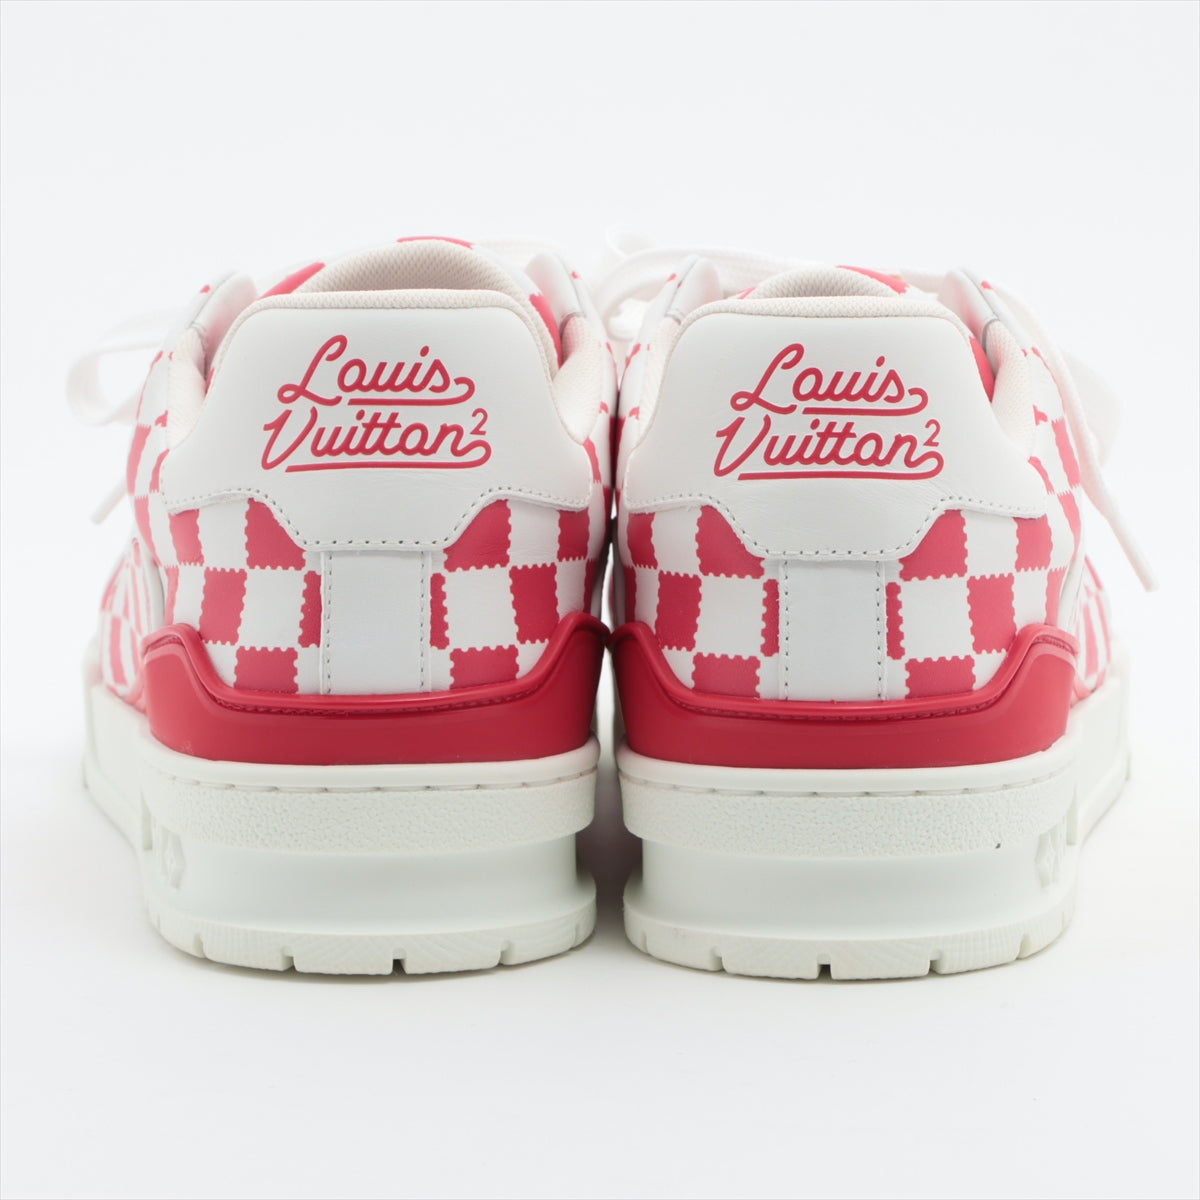 Louis Vuitton x NIGO LV Trainer Line 21 years Leather Sneakers 6 1/2 Men's Red x white BM0291 checkers Is there a replacement string